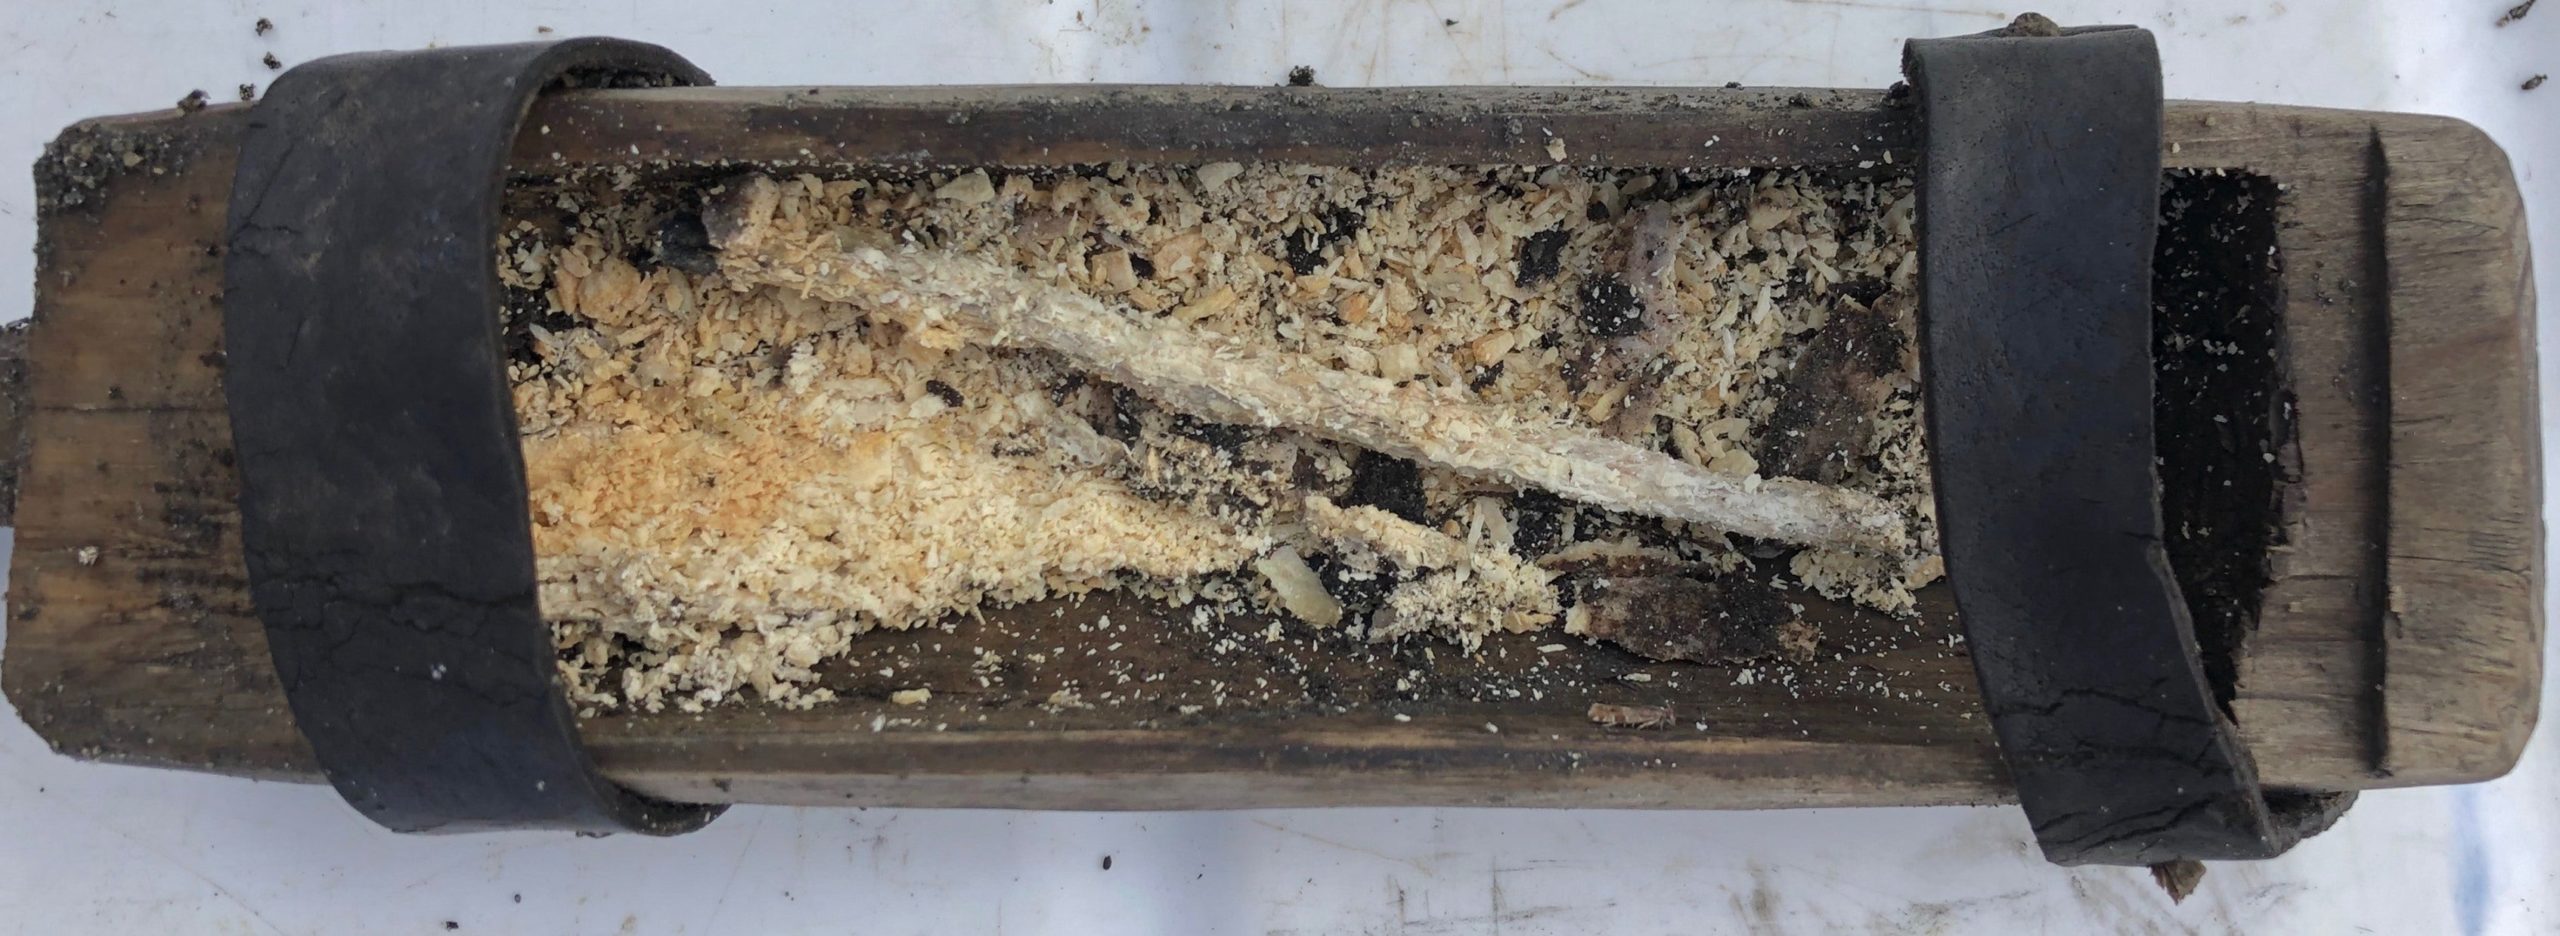 The opened box, with its beeswax contents inside.  (Image: The Glacier Archaeology Program Innlandet)